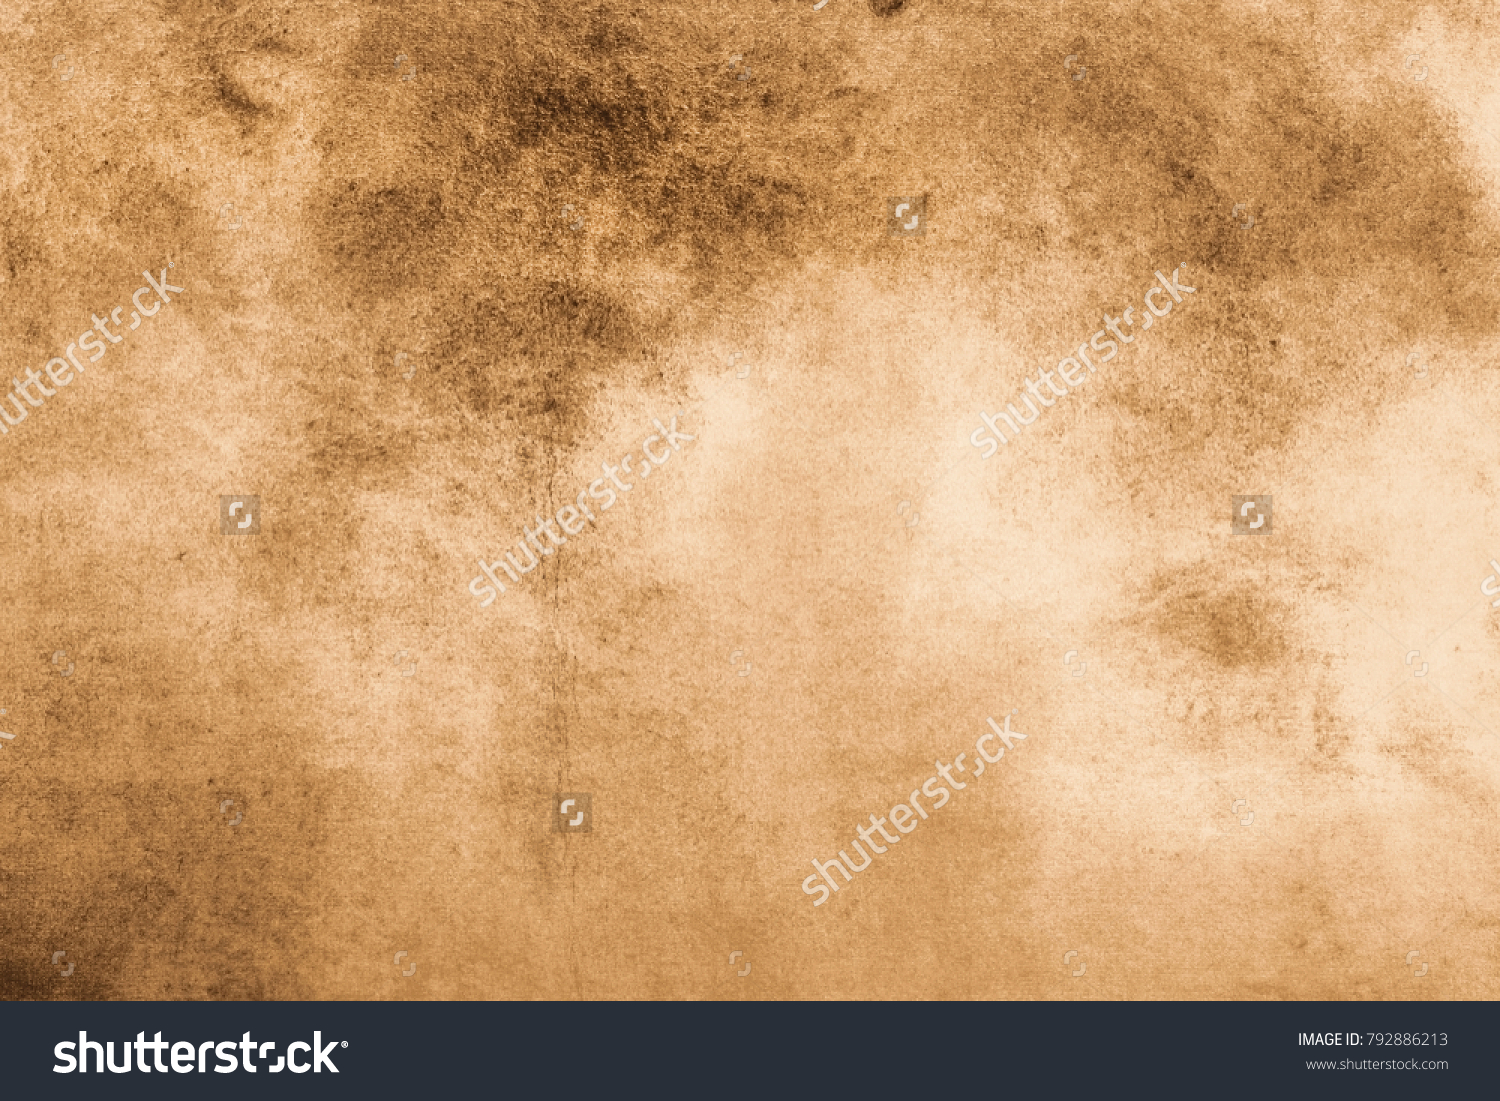 Aged old style vintage background. Old photo texture illustration stylization in sepia colors with blots, stains and scratches #792886213